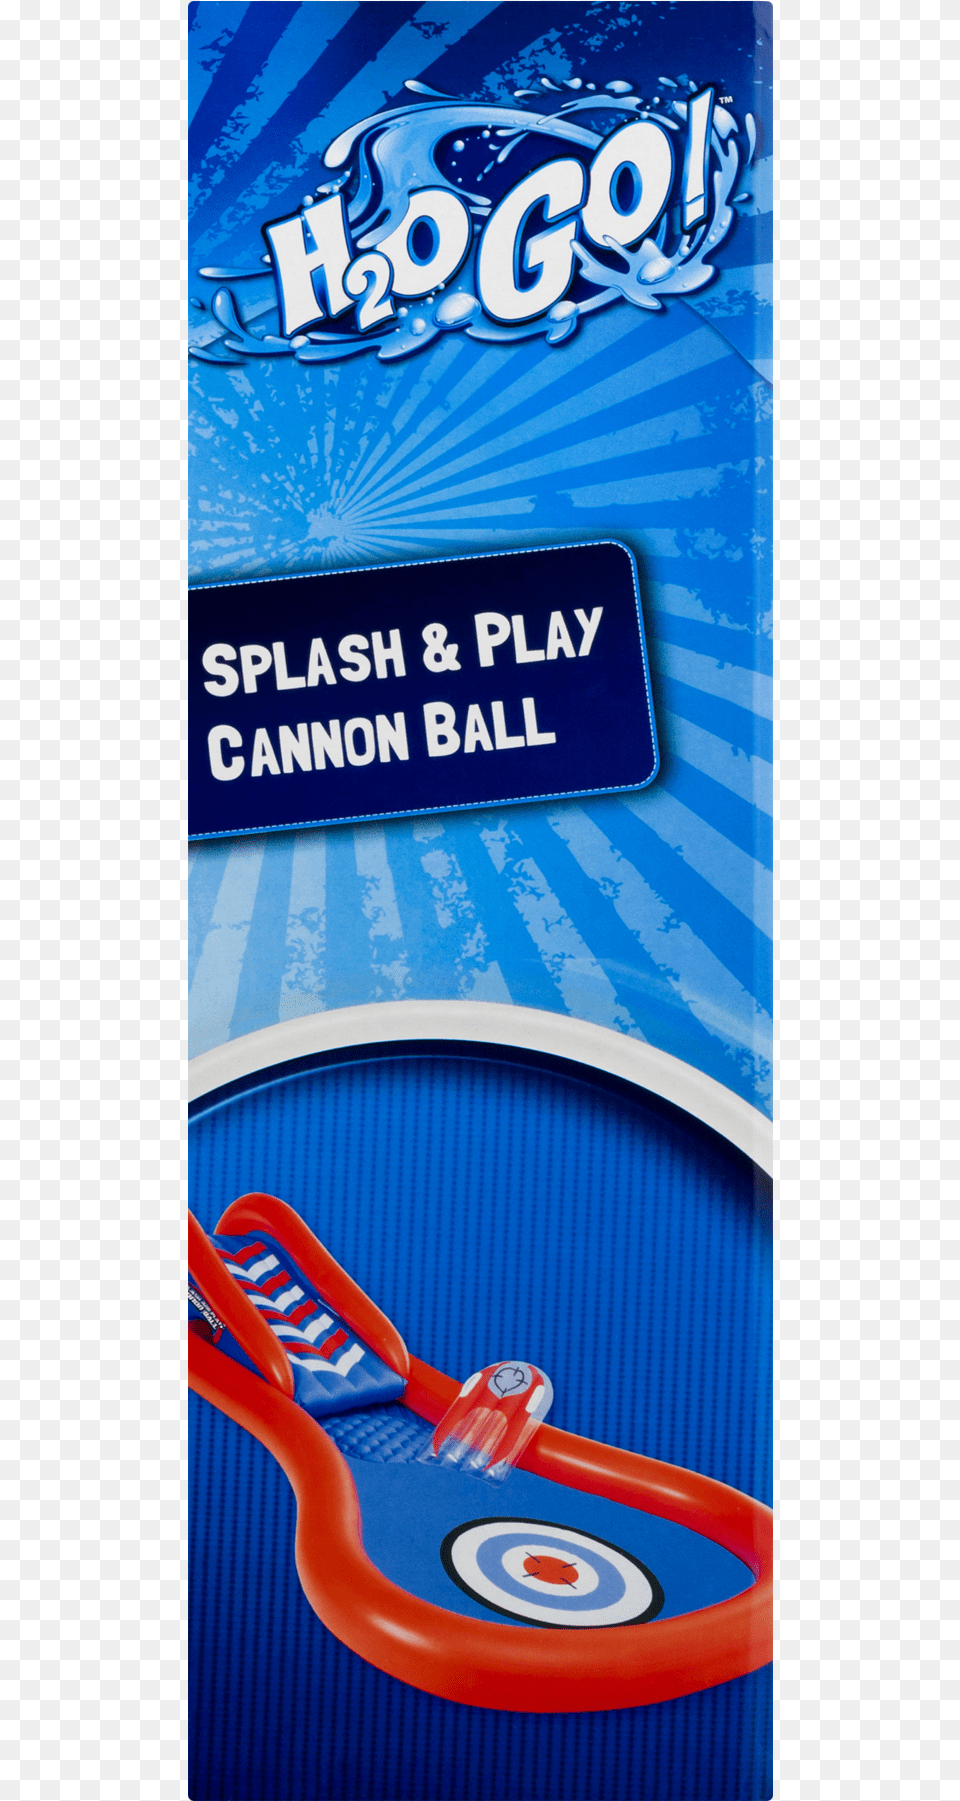 Splash Amp Play Cannon Ball Bestway H2o Go Rider Pretty Pink Flamingo, Advertisement, Poster Free Png Download